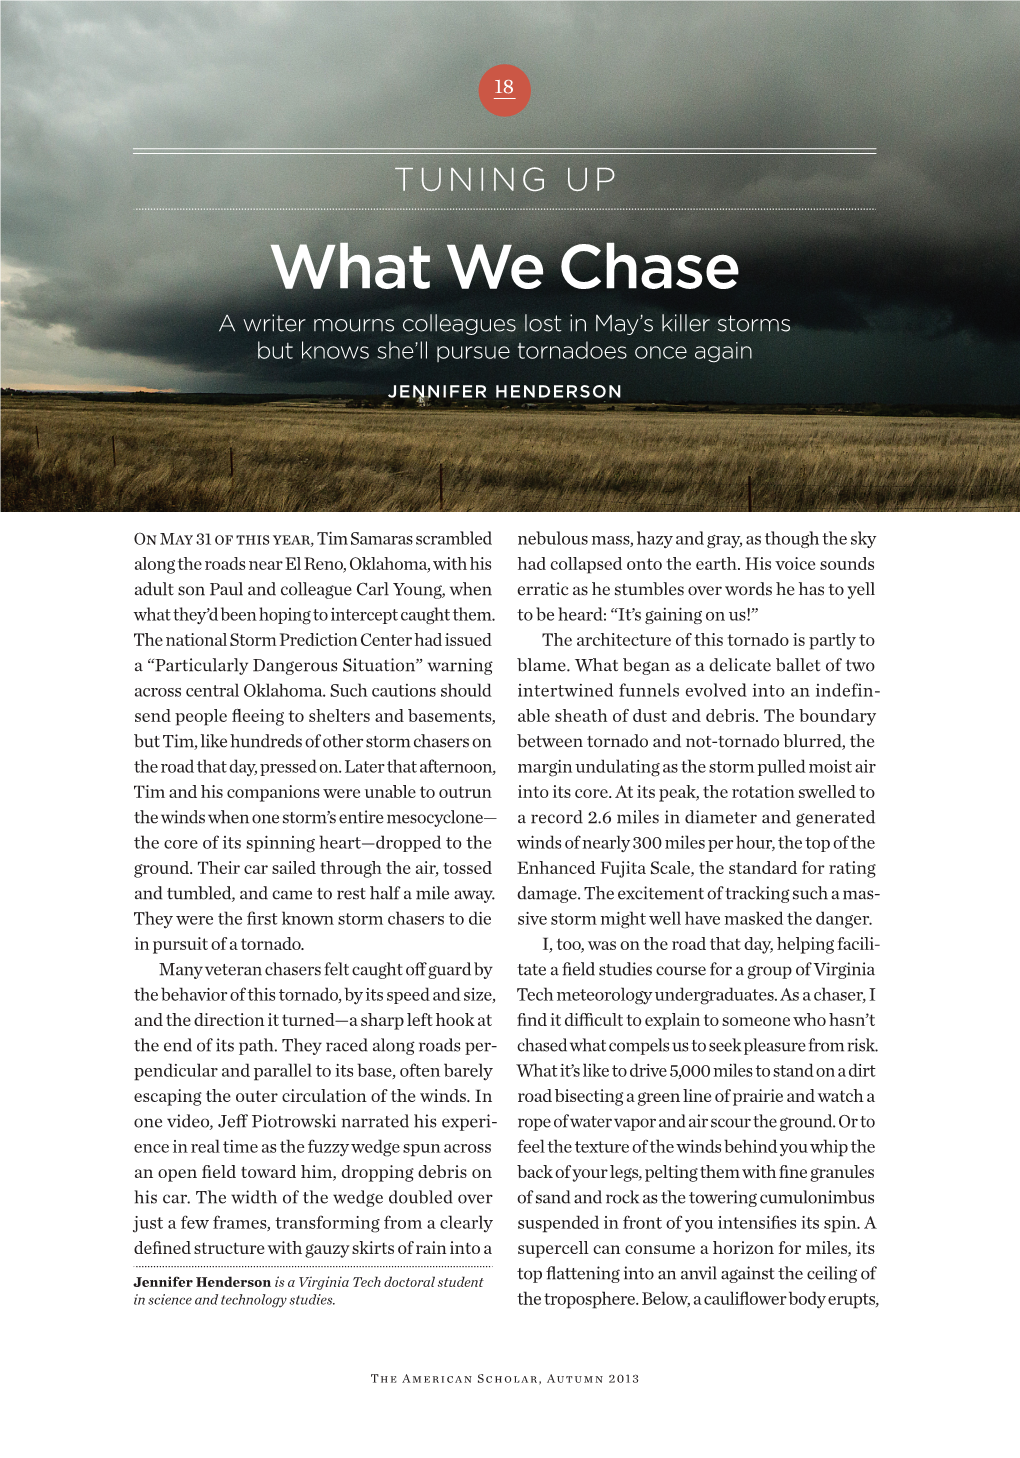 What We Chase a Writer Mourns Colleagues Lost in May’S Killer Storms but Knows She’Ll Pursue Tornadoes Once Again